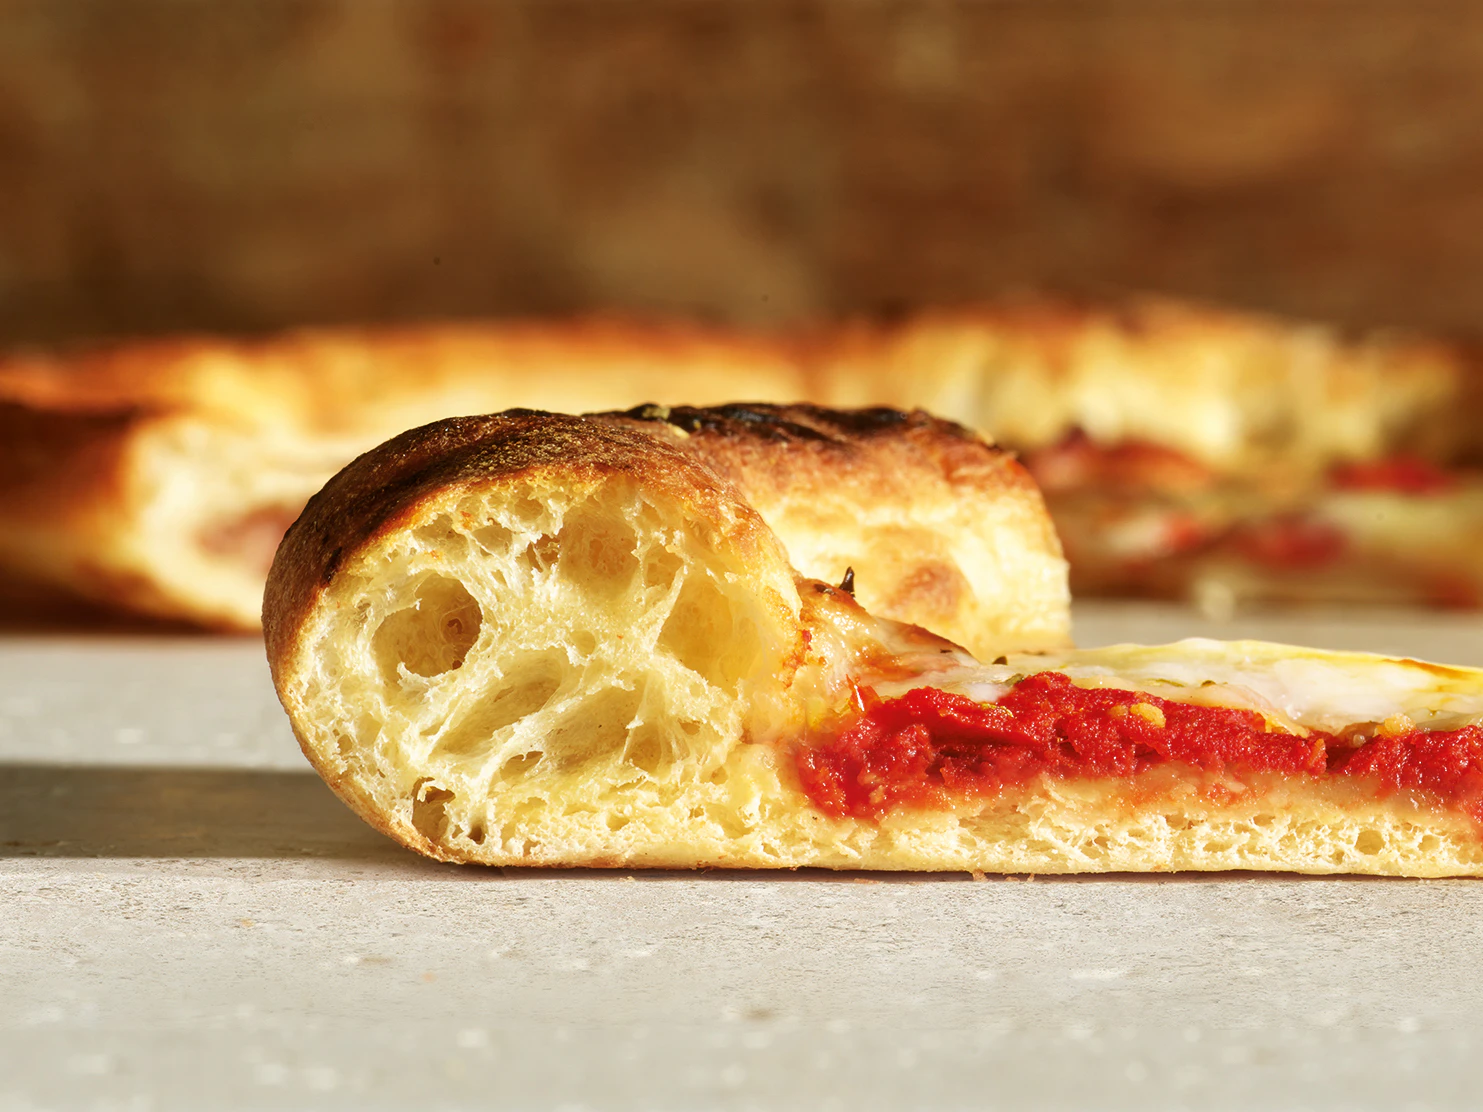 A cut through view of a slice of pizza with a thick crust.